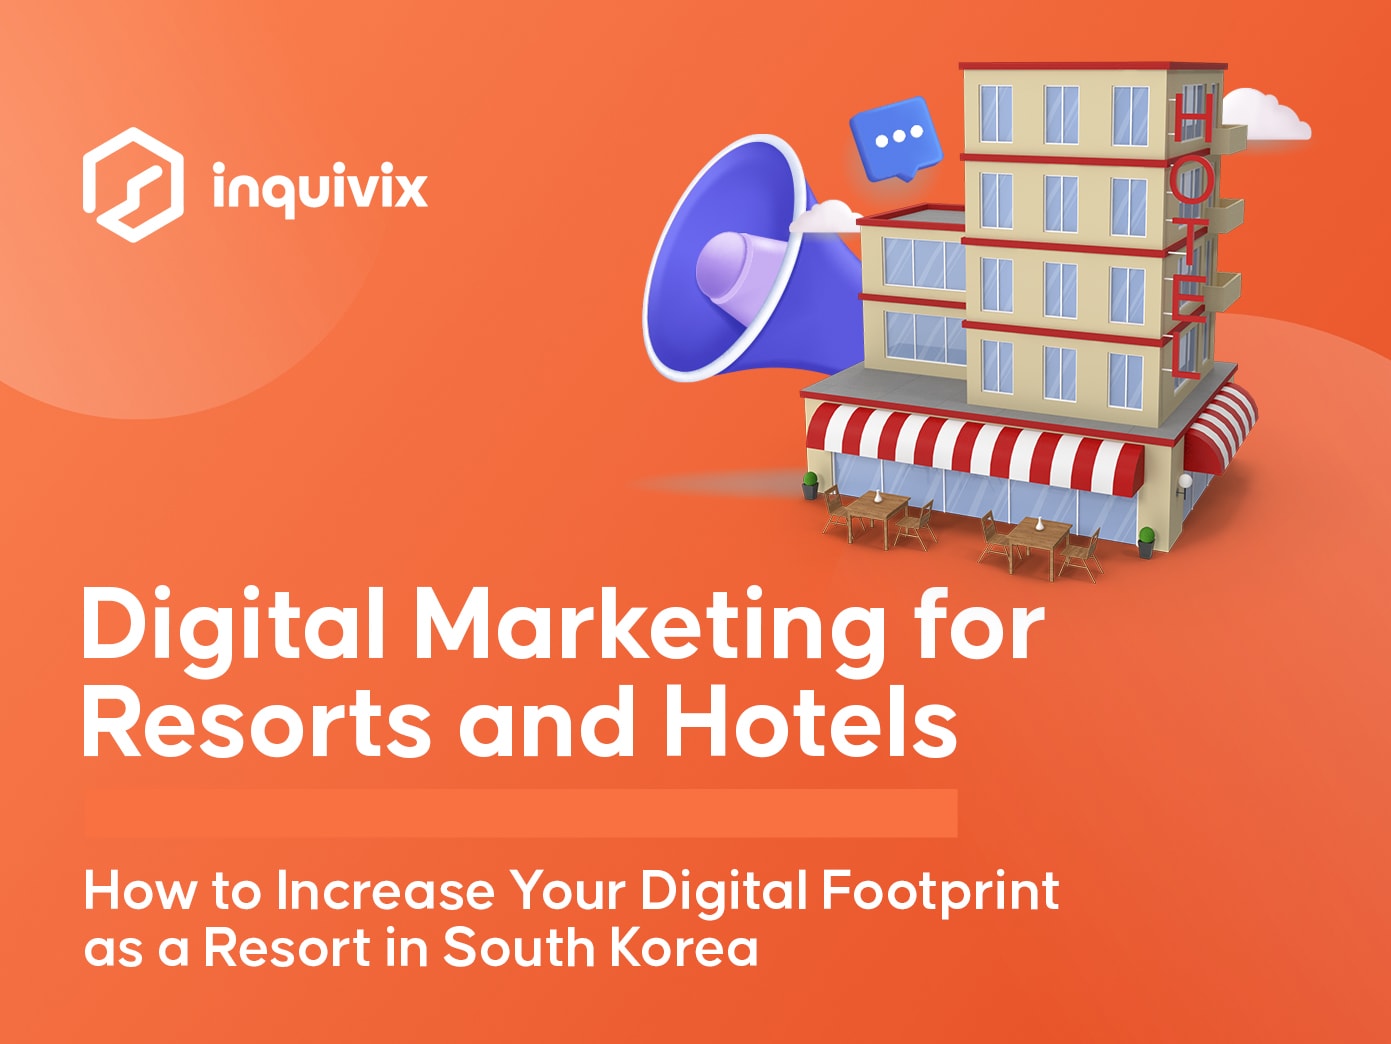 Digital Marketing for Resorts and Hotels How to Increase Your Digital Footprint as a Resort in South Korea | Inquivix